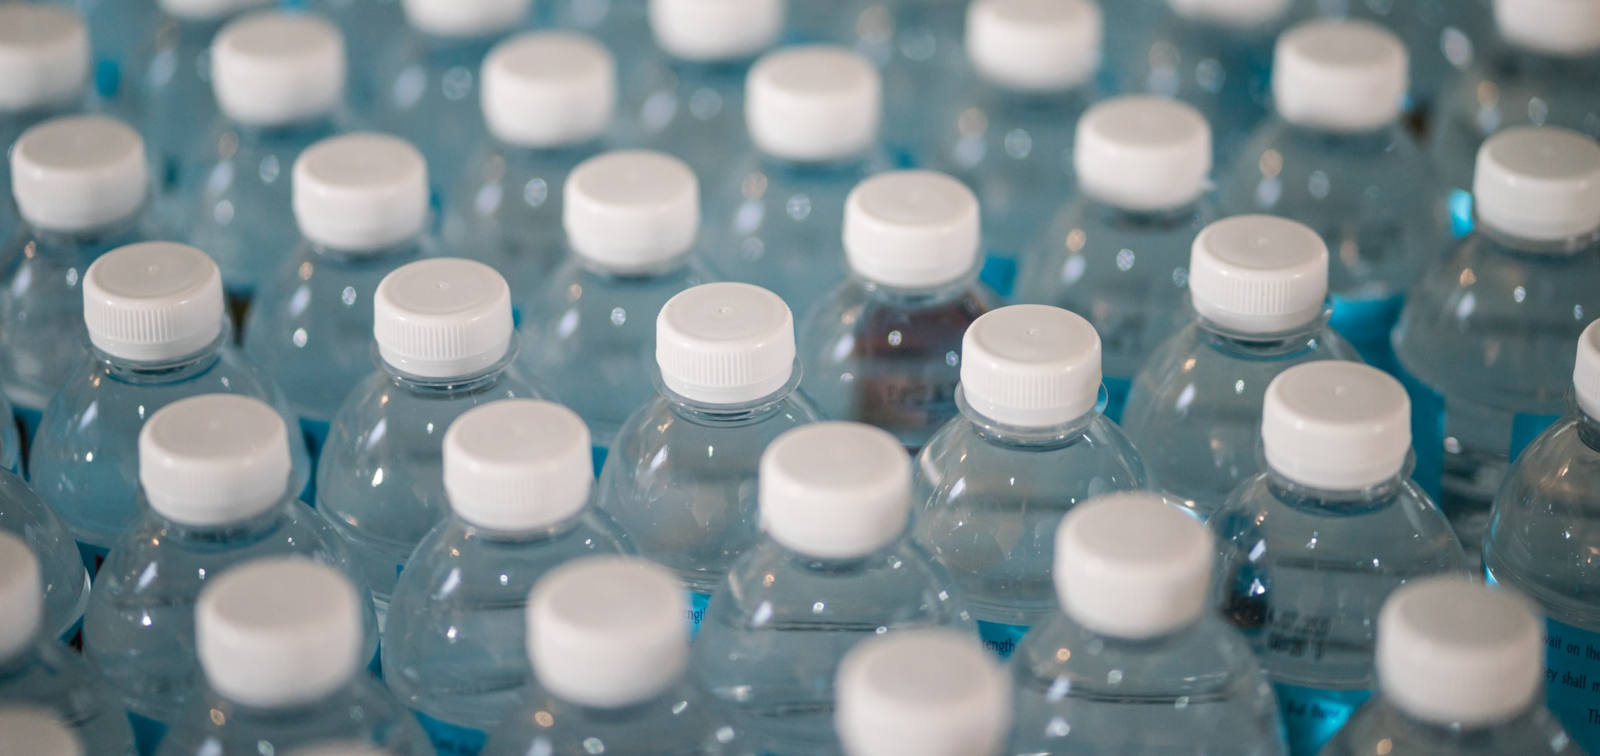 Bottled water. Photo by Jonathan Chng on Unsplash.